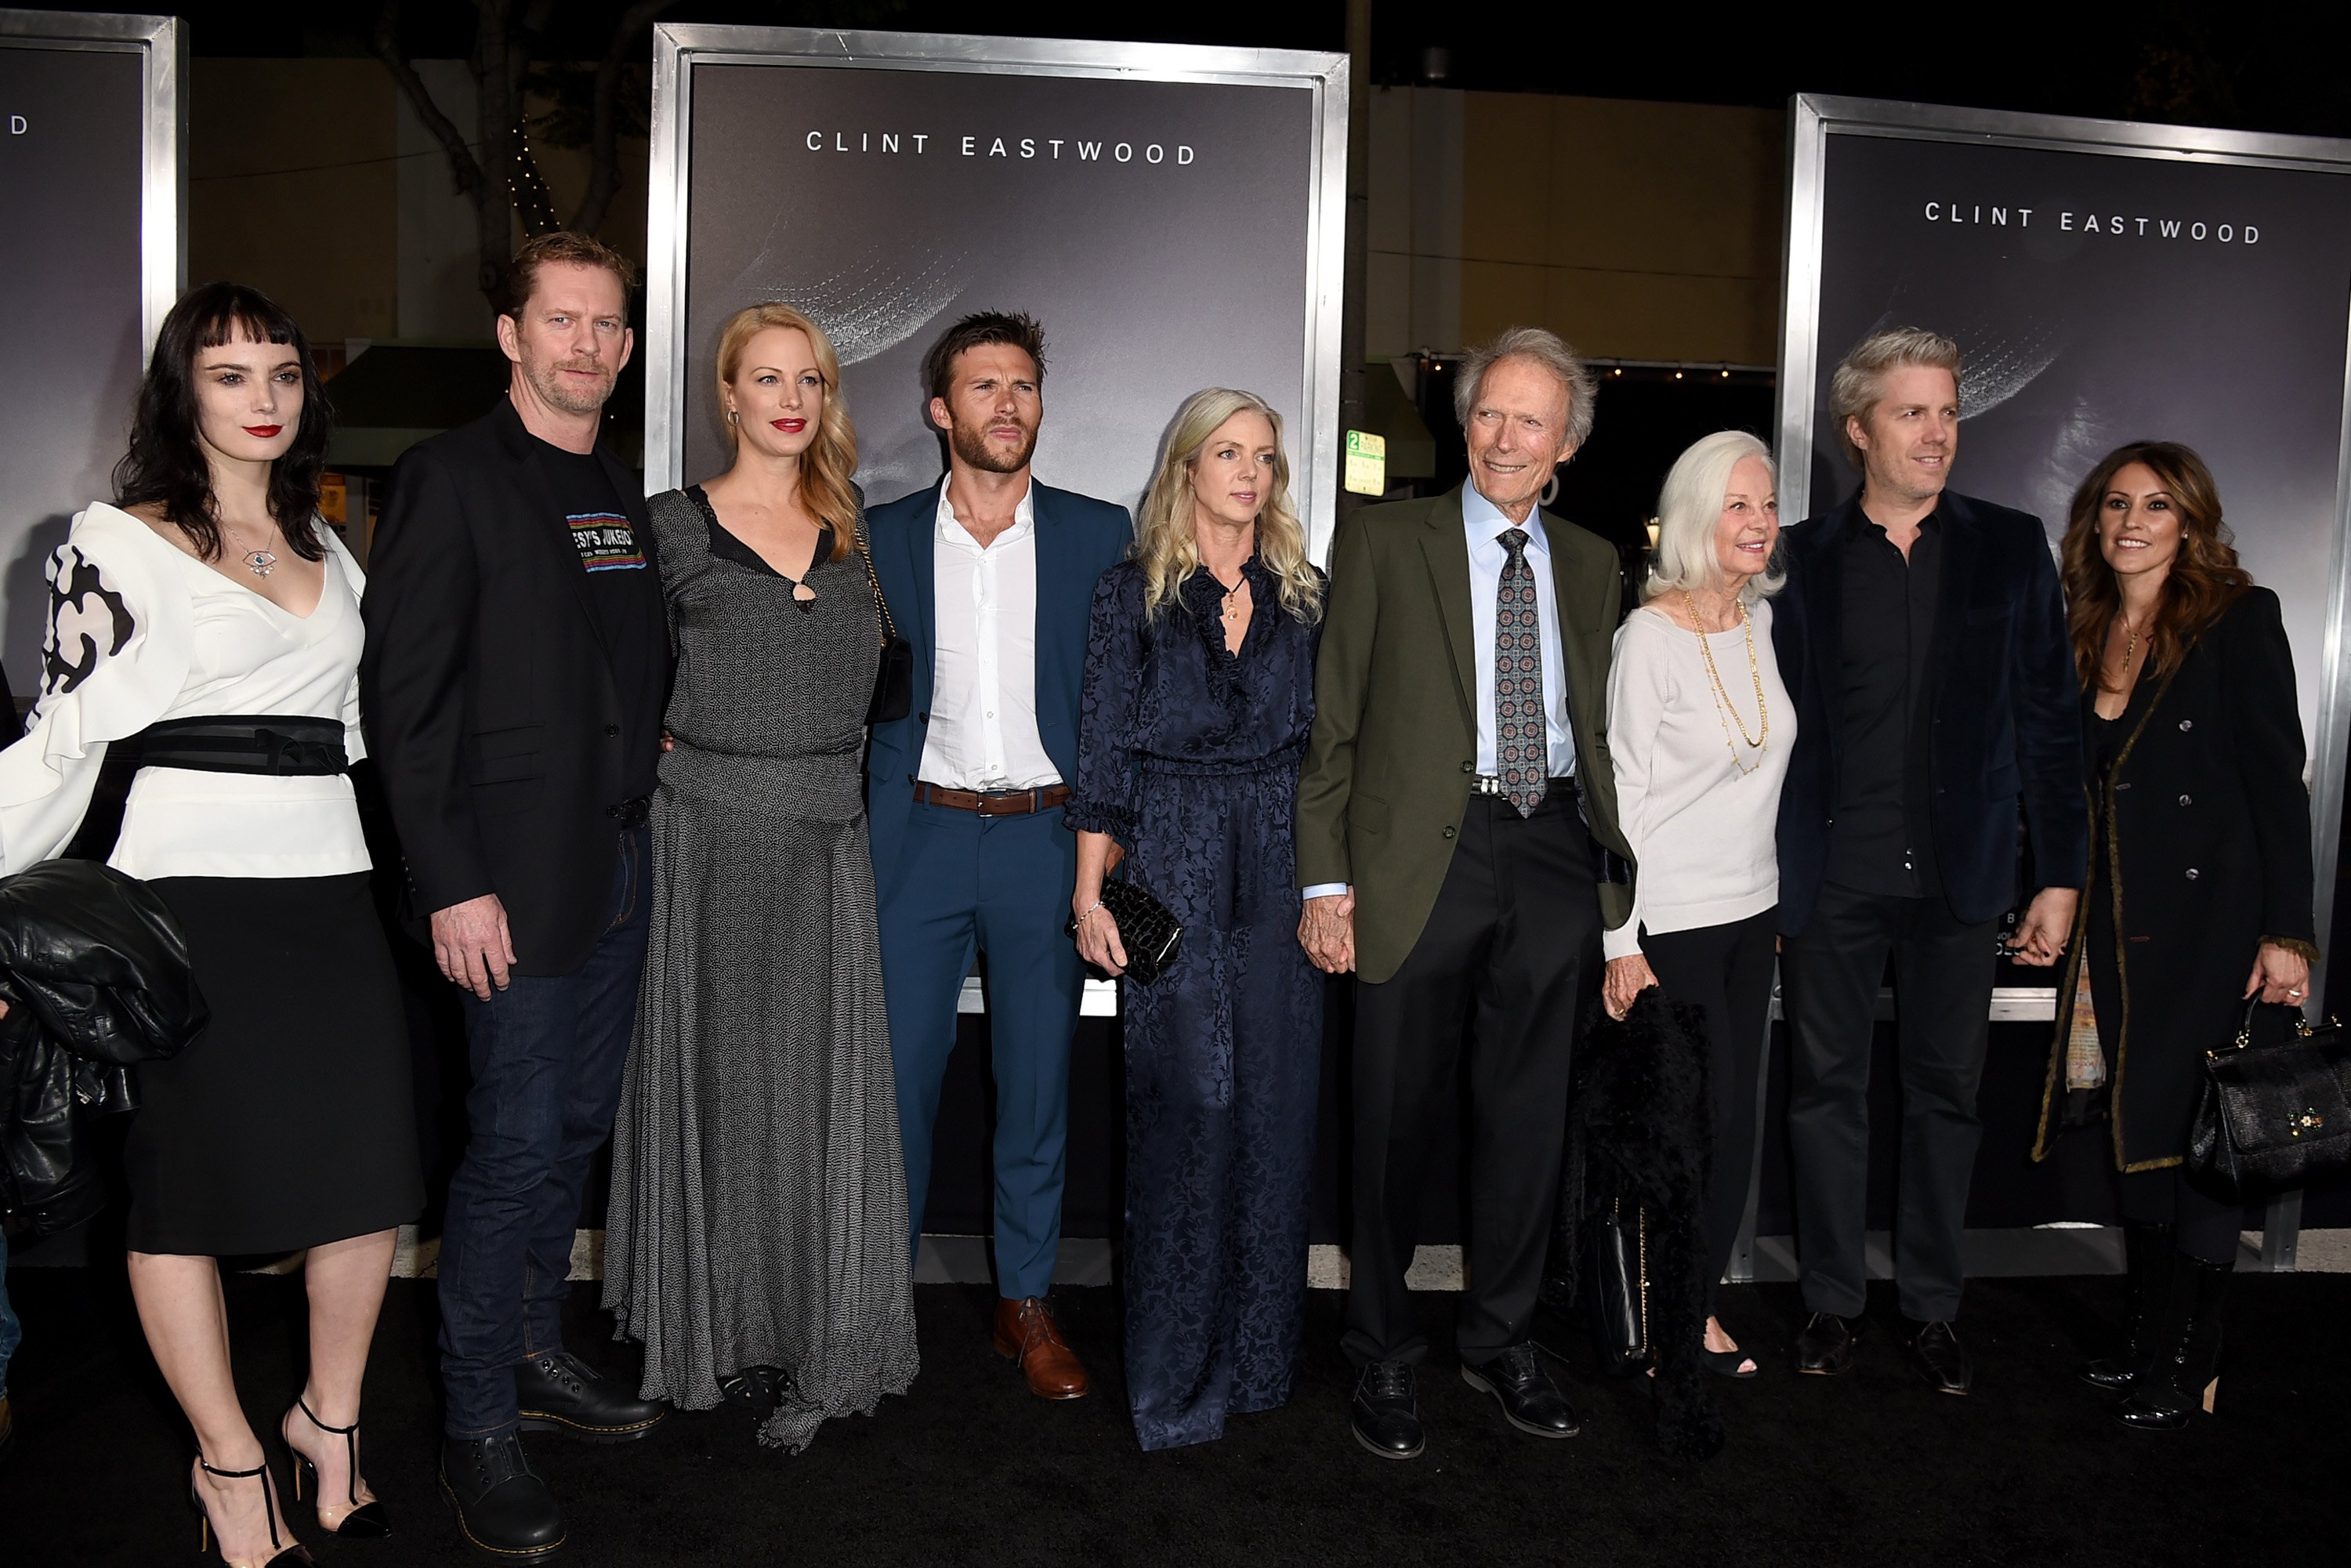 Graylen Eastwood, Stacy Poitras, Alison Eastwood, Scott Eastwood, Christina Sandera, Clint Eastwood, Maggie Johnson, Kyle Eastwood, and Cynthia Ramirez pose at the premiere of Warner Bros. Pictures' "The Mule" at the Village Theatre on December 10, 2018 in Los Angeles, California. | Source: Getty Images